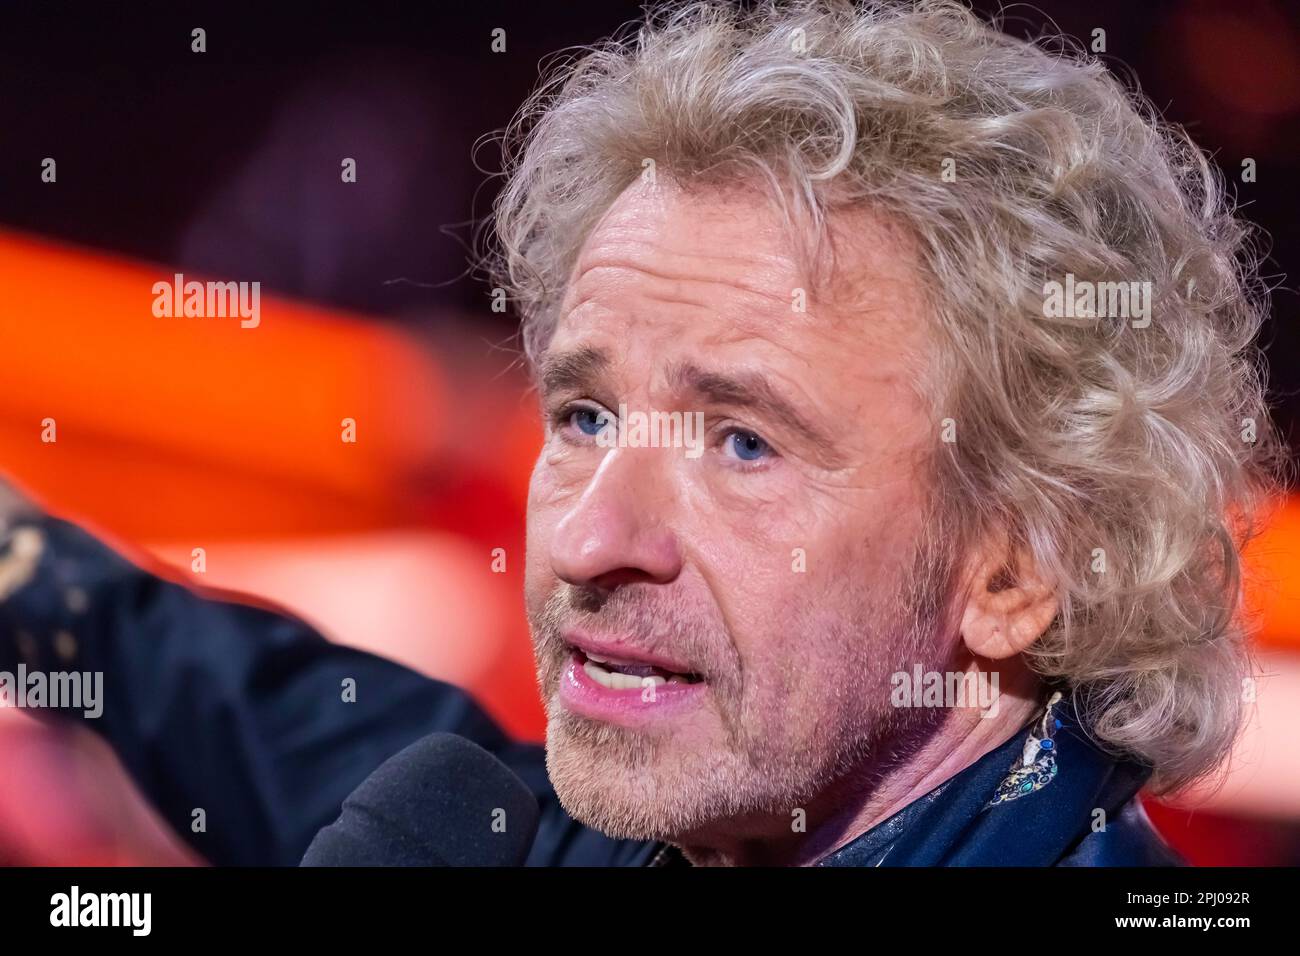 Presenter Thomas Gottschalk, portrait. 50 years of ZDF Hitparade, anniversary show of the TV classic with hit songs and hit parade artists, recording Stock Photo